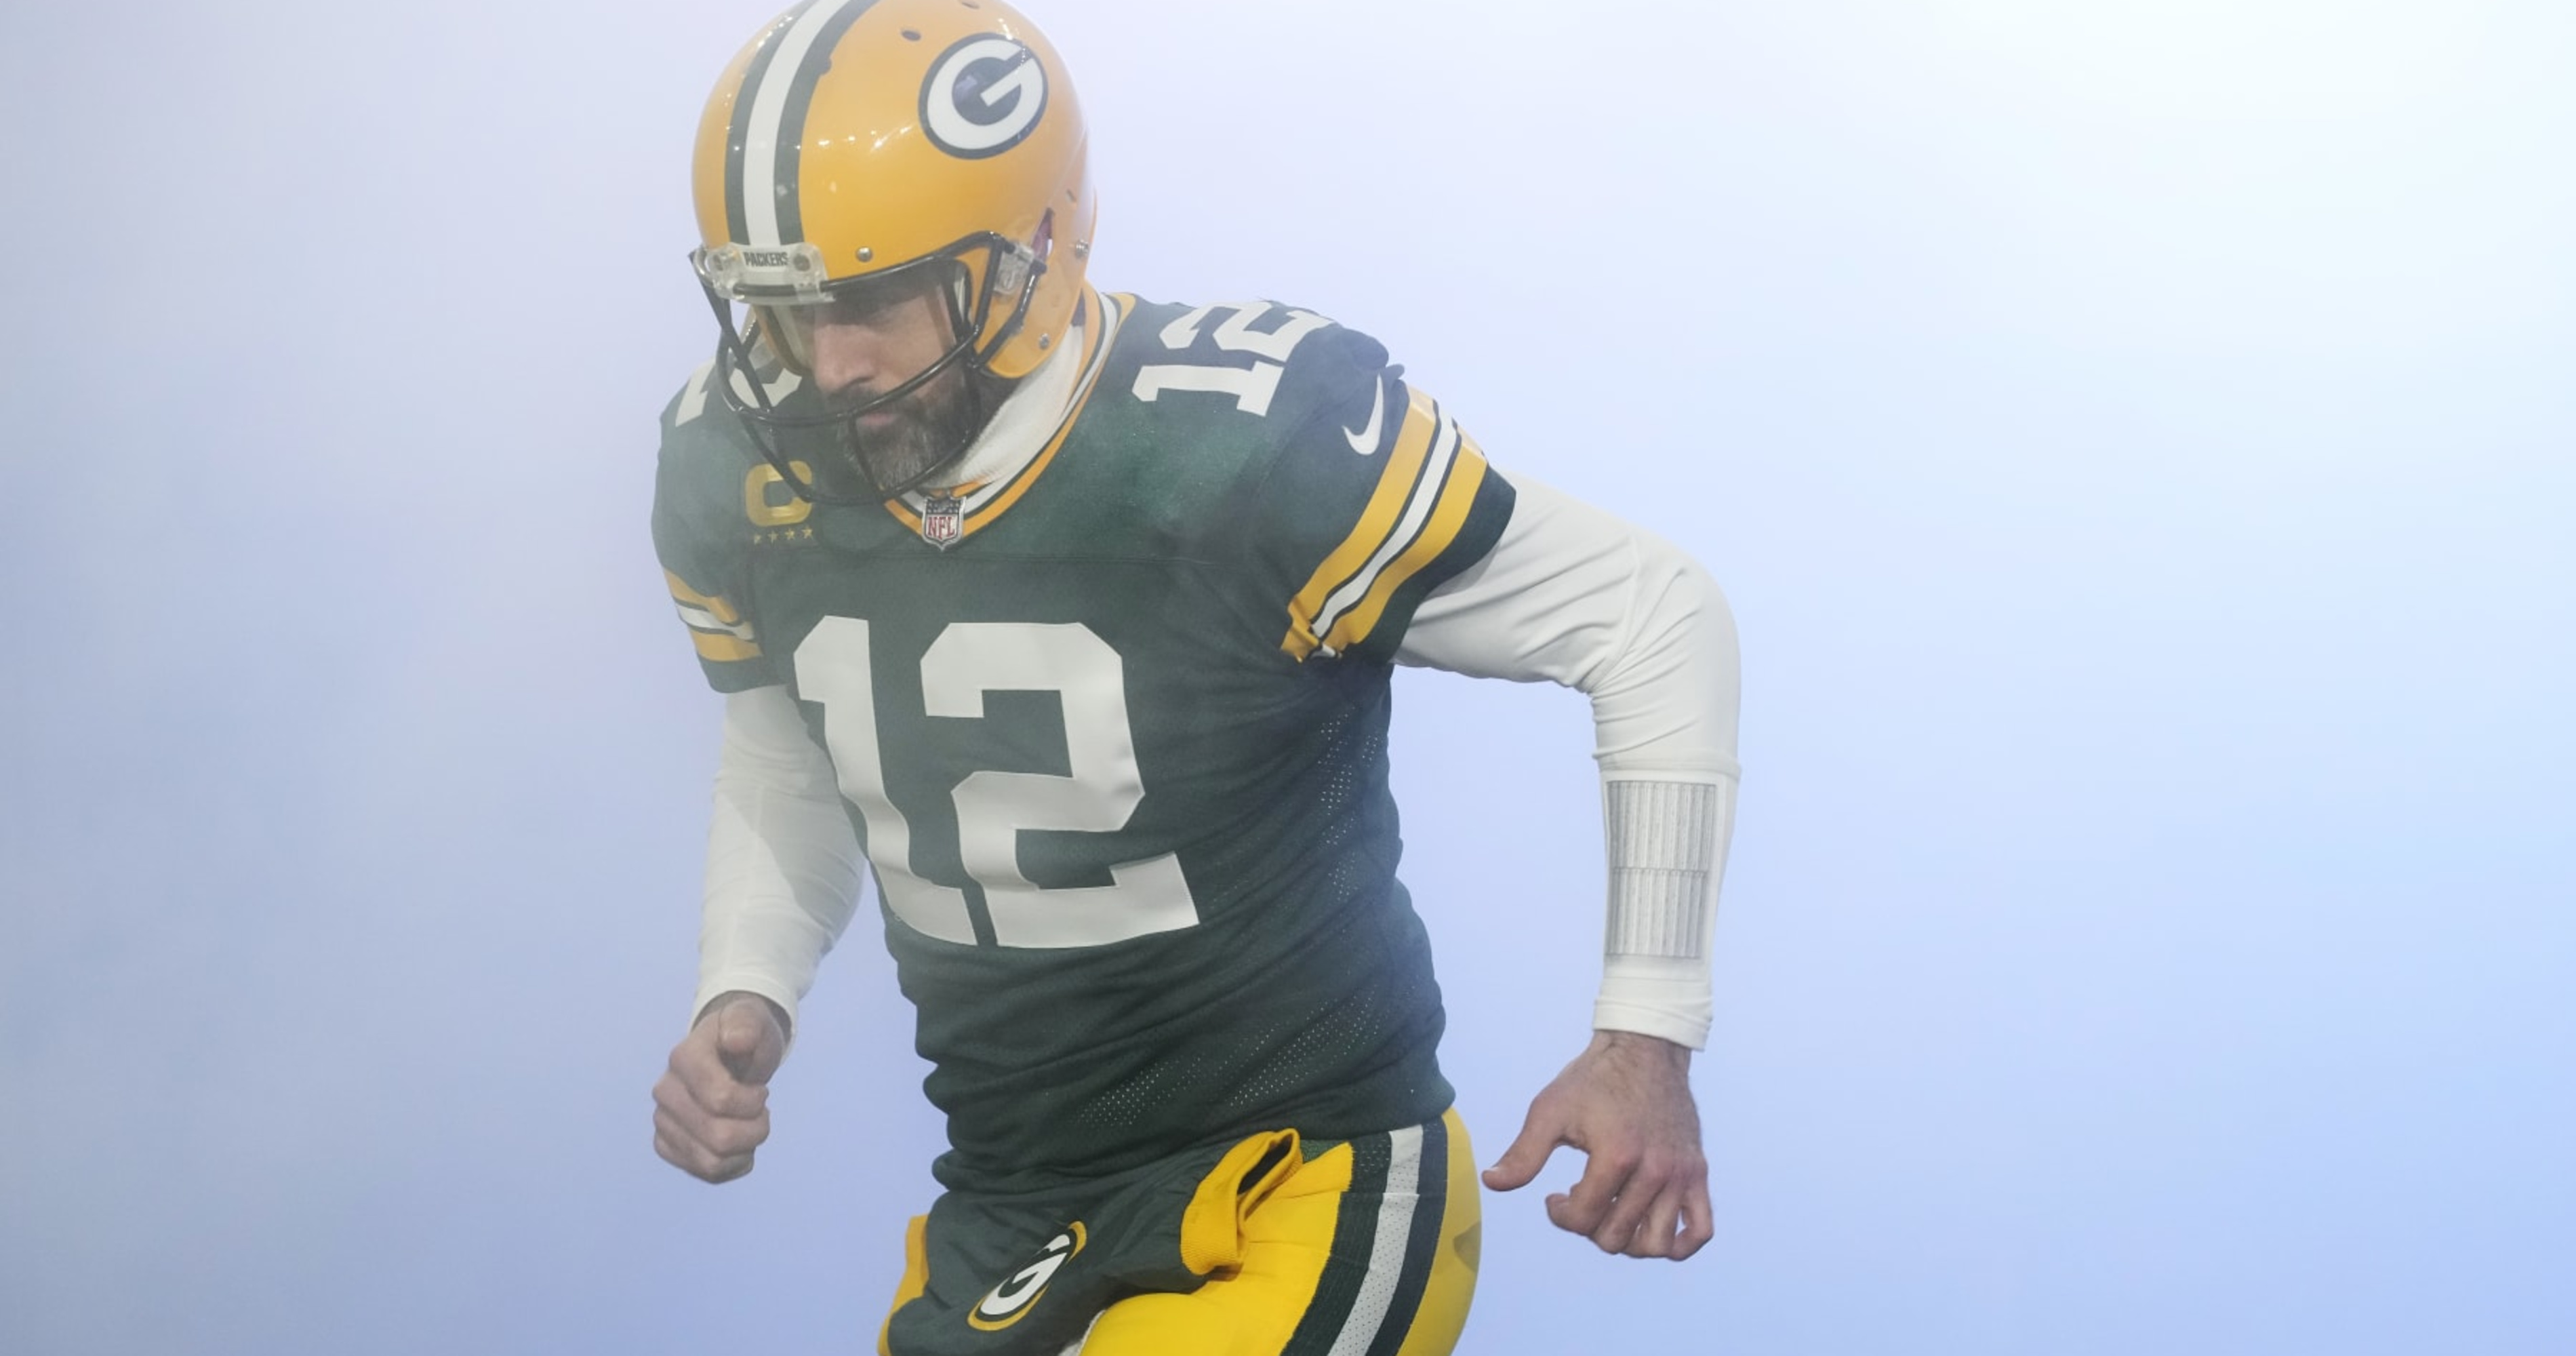 Aaron Jones' hint on Aaron Rodgers' future with the Packers